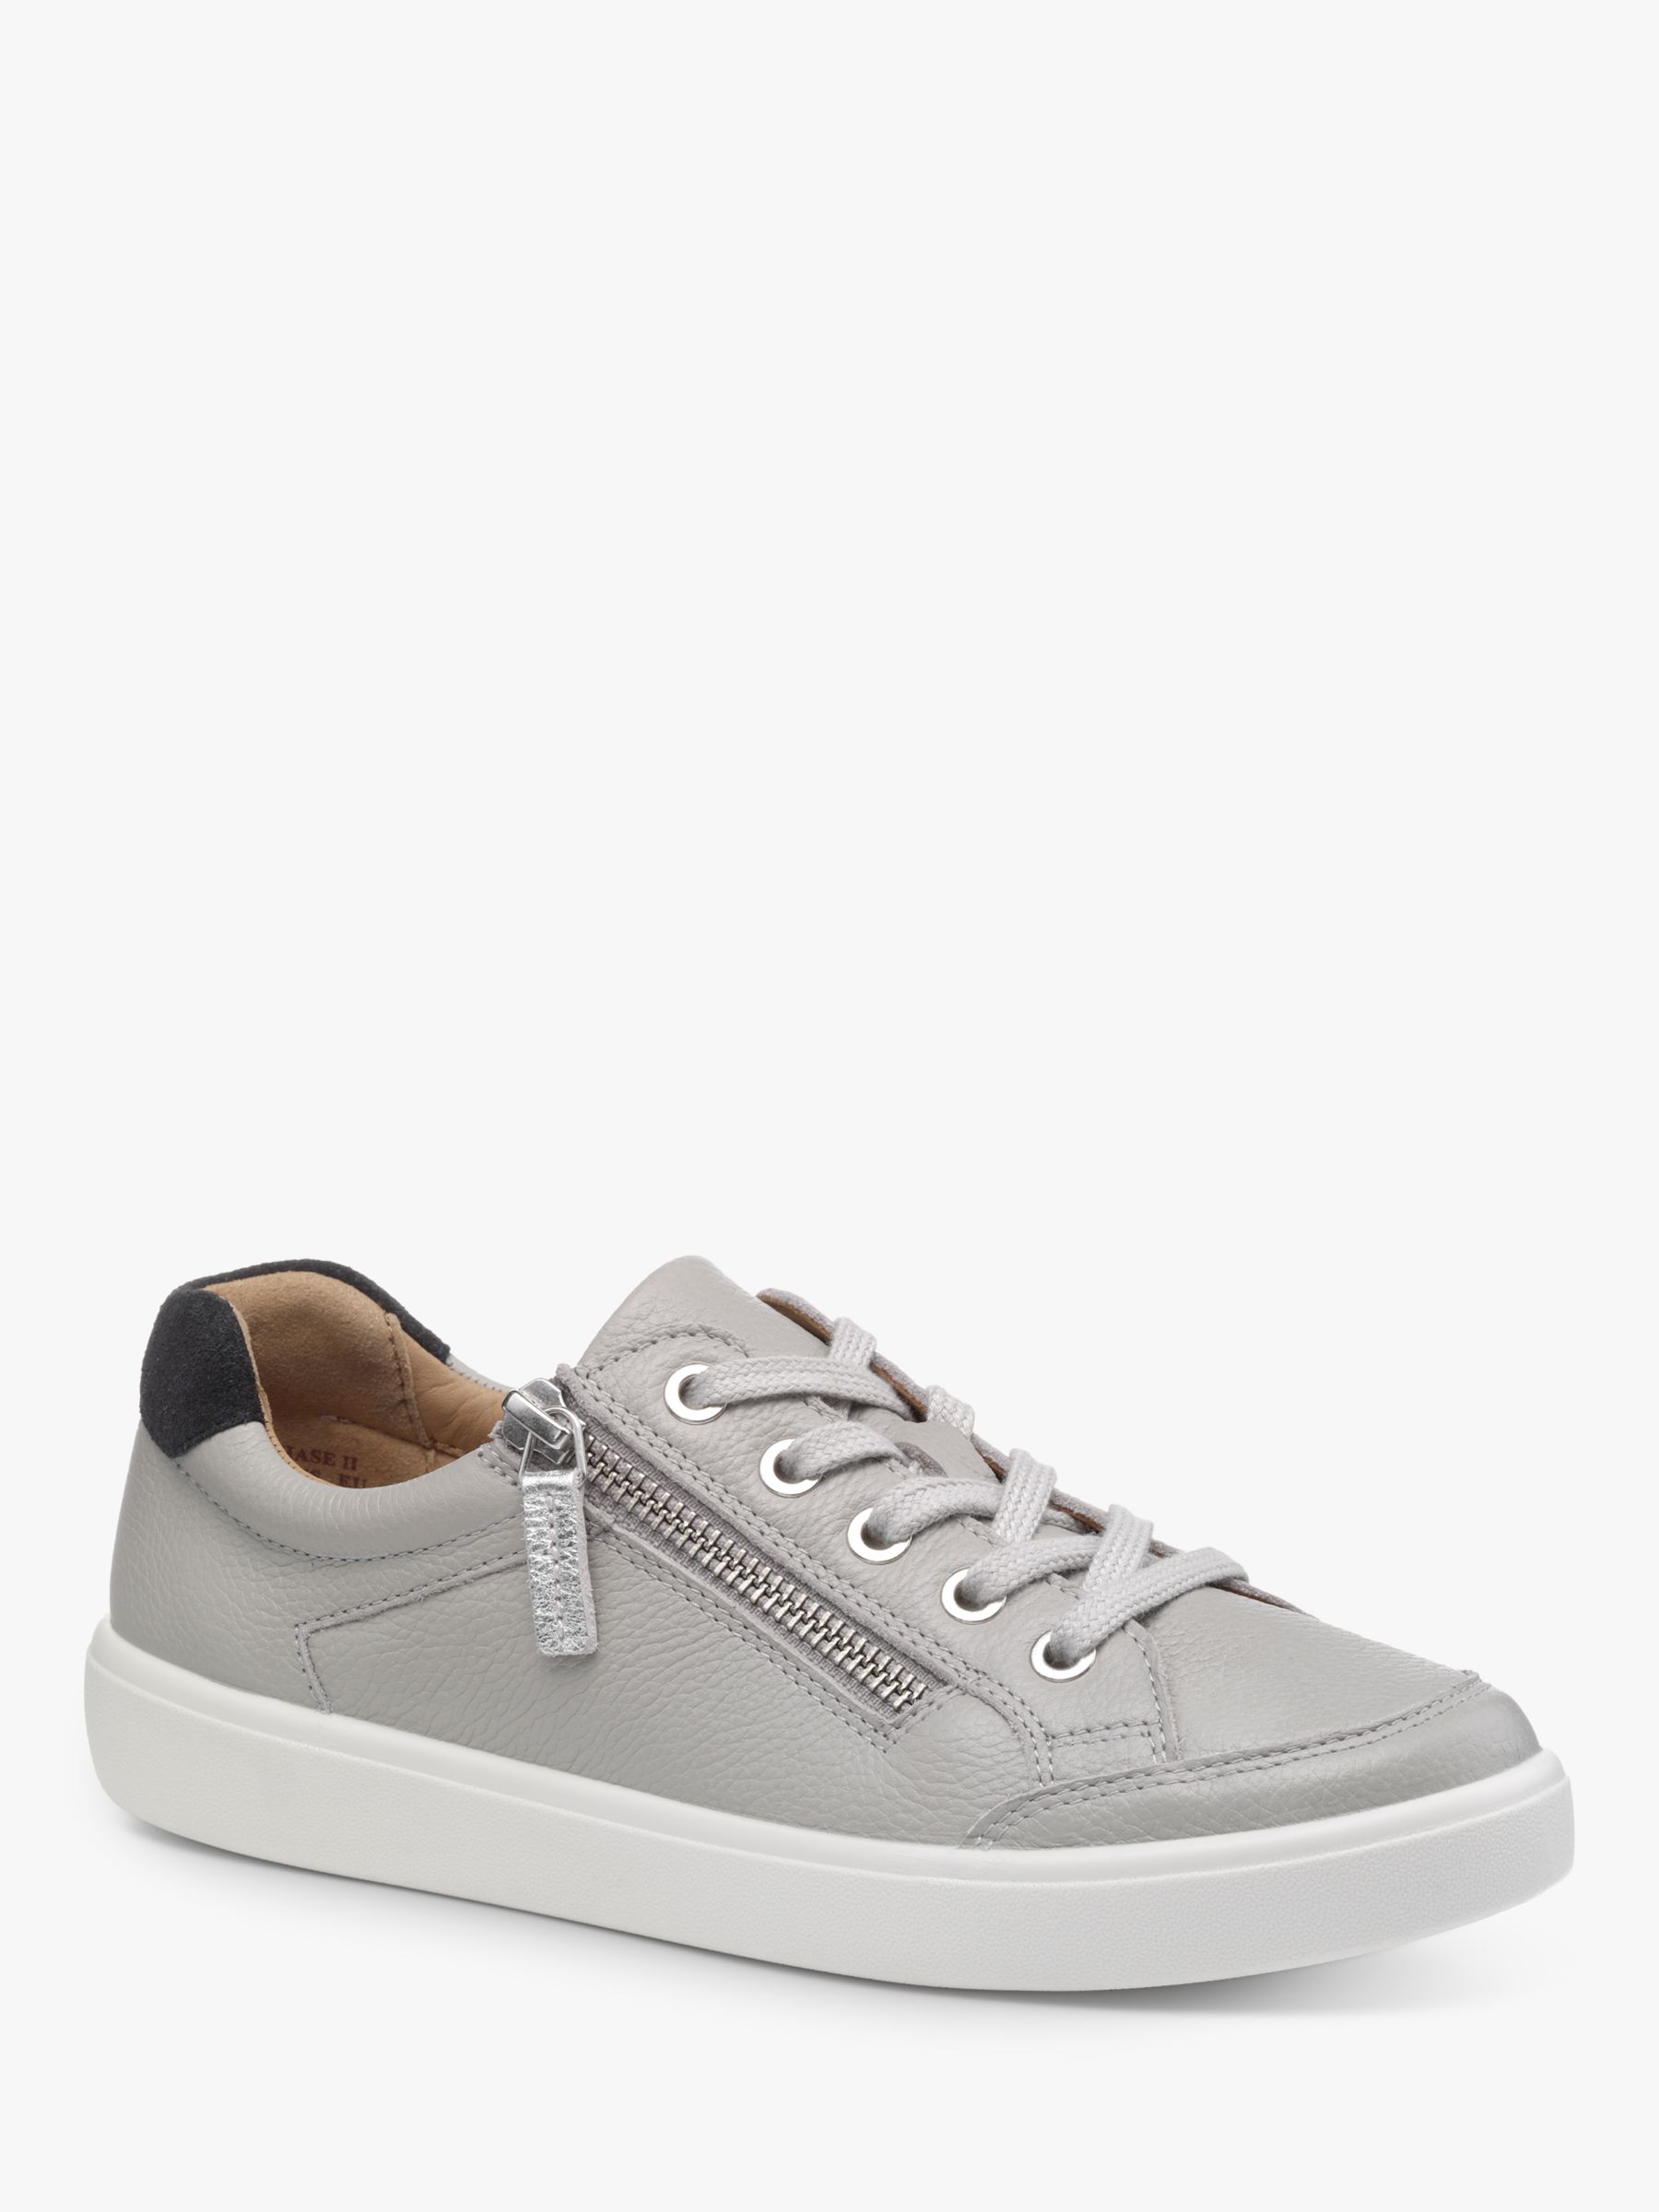 Buy Hotter Chase II Wide Fit Leather Zip and Go Trainers Online at johnlewis.com